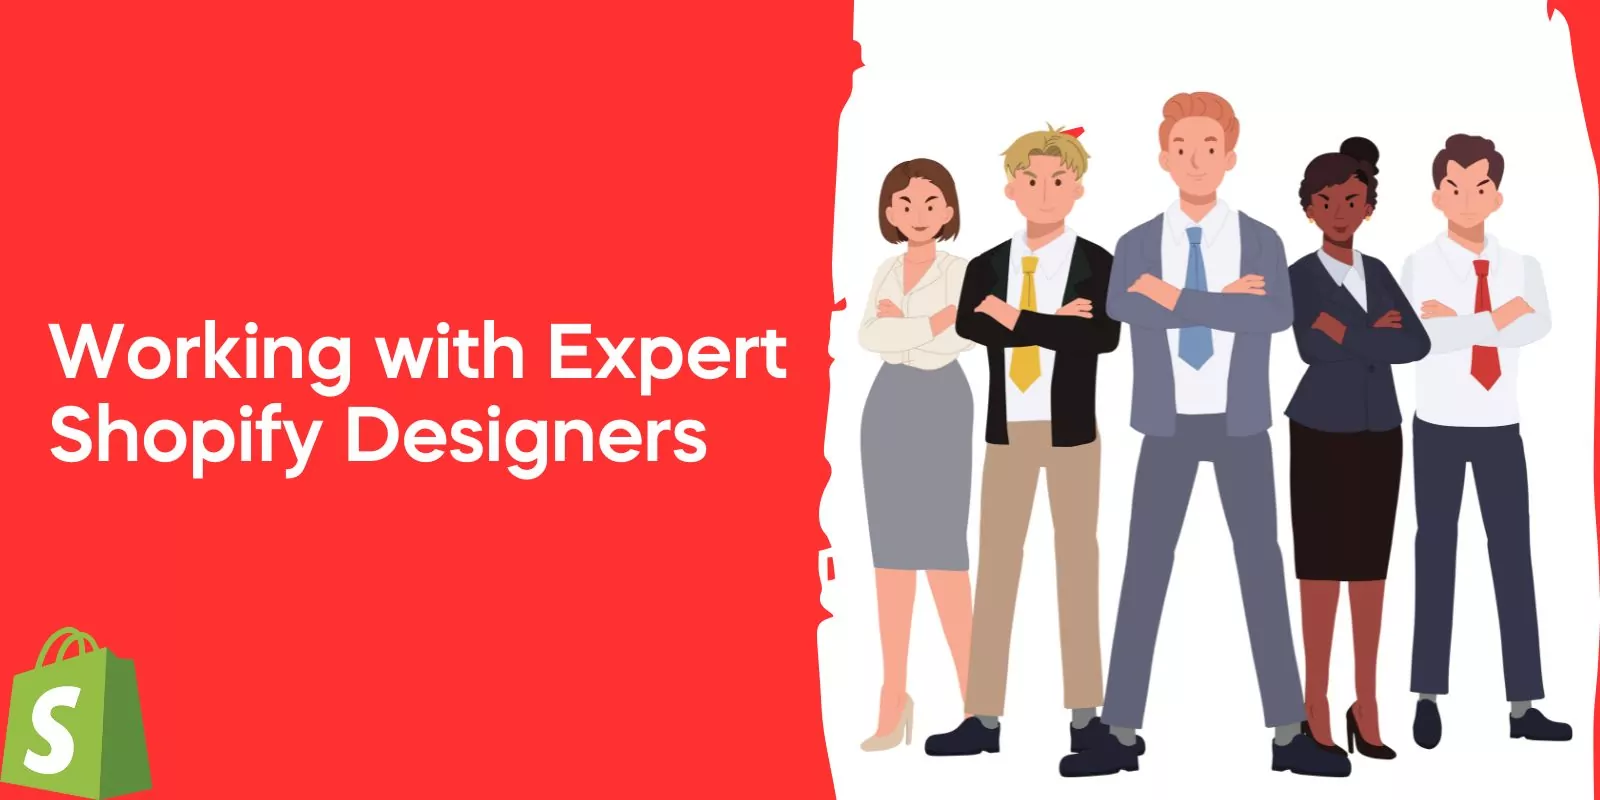 Working with Expert Shopify Designers